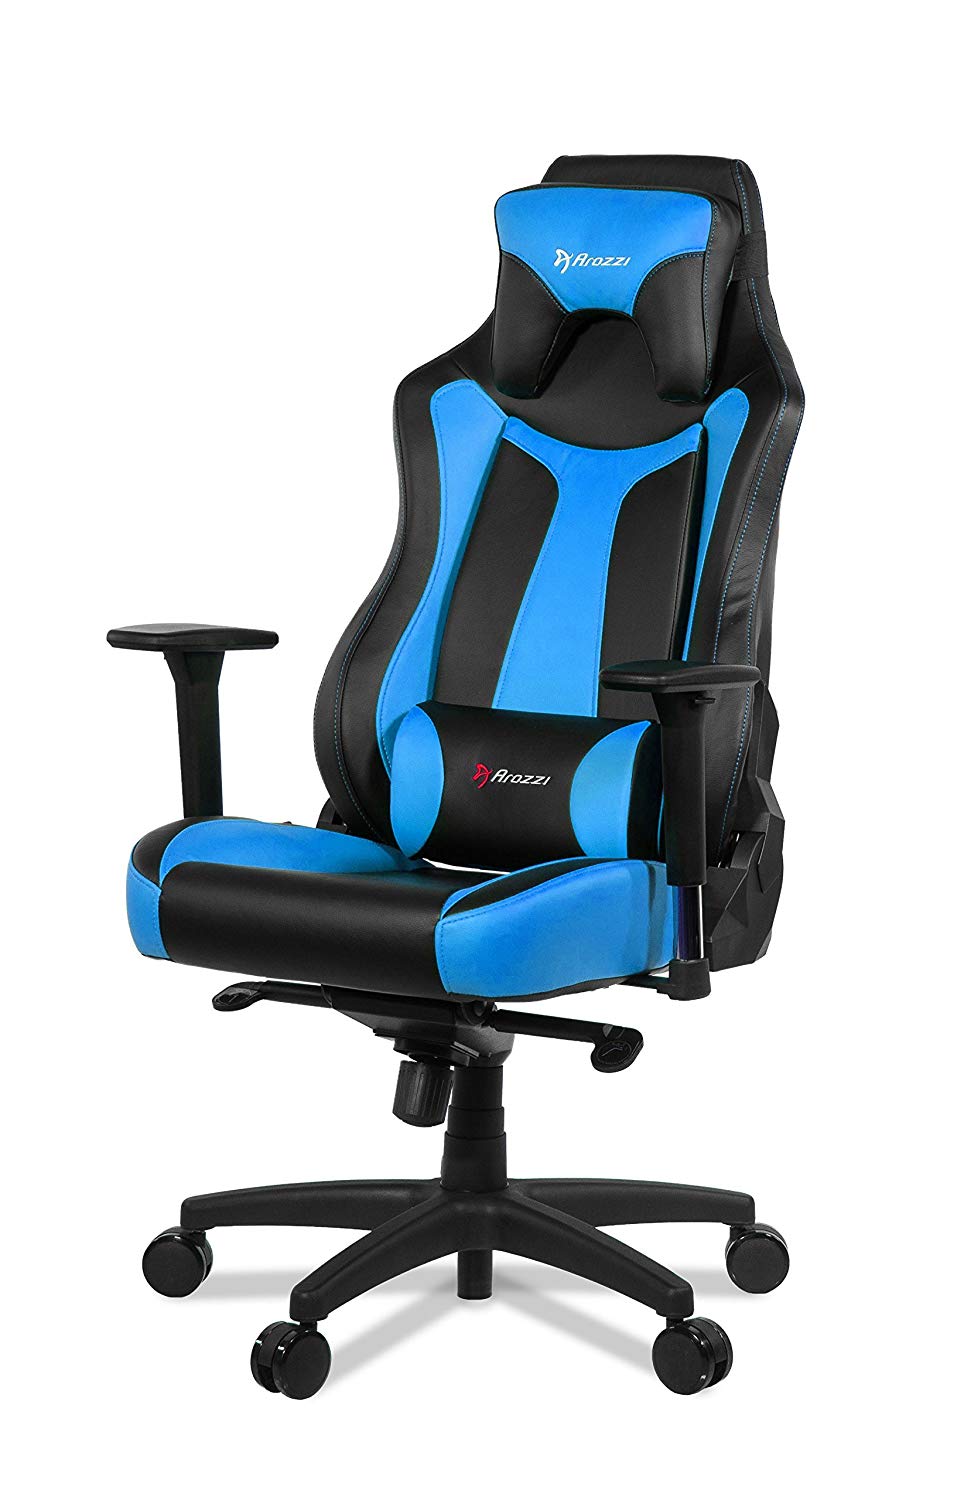 Arozzi Vernazza Gaming Chair Blue Price in Pakistan